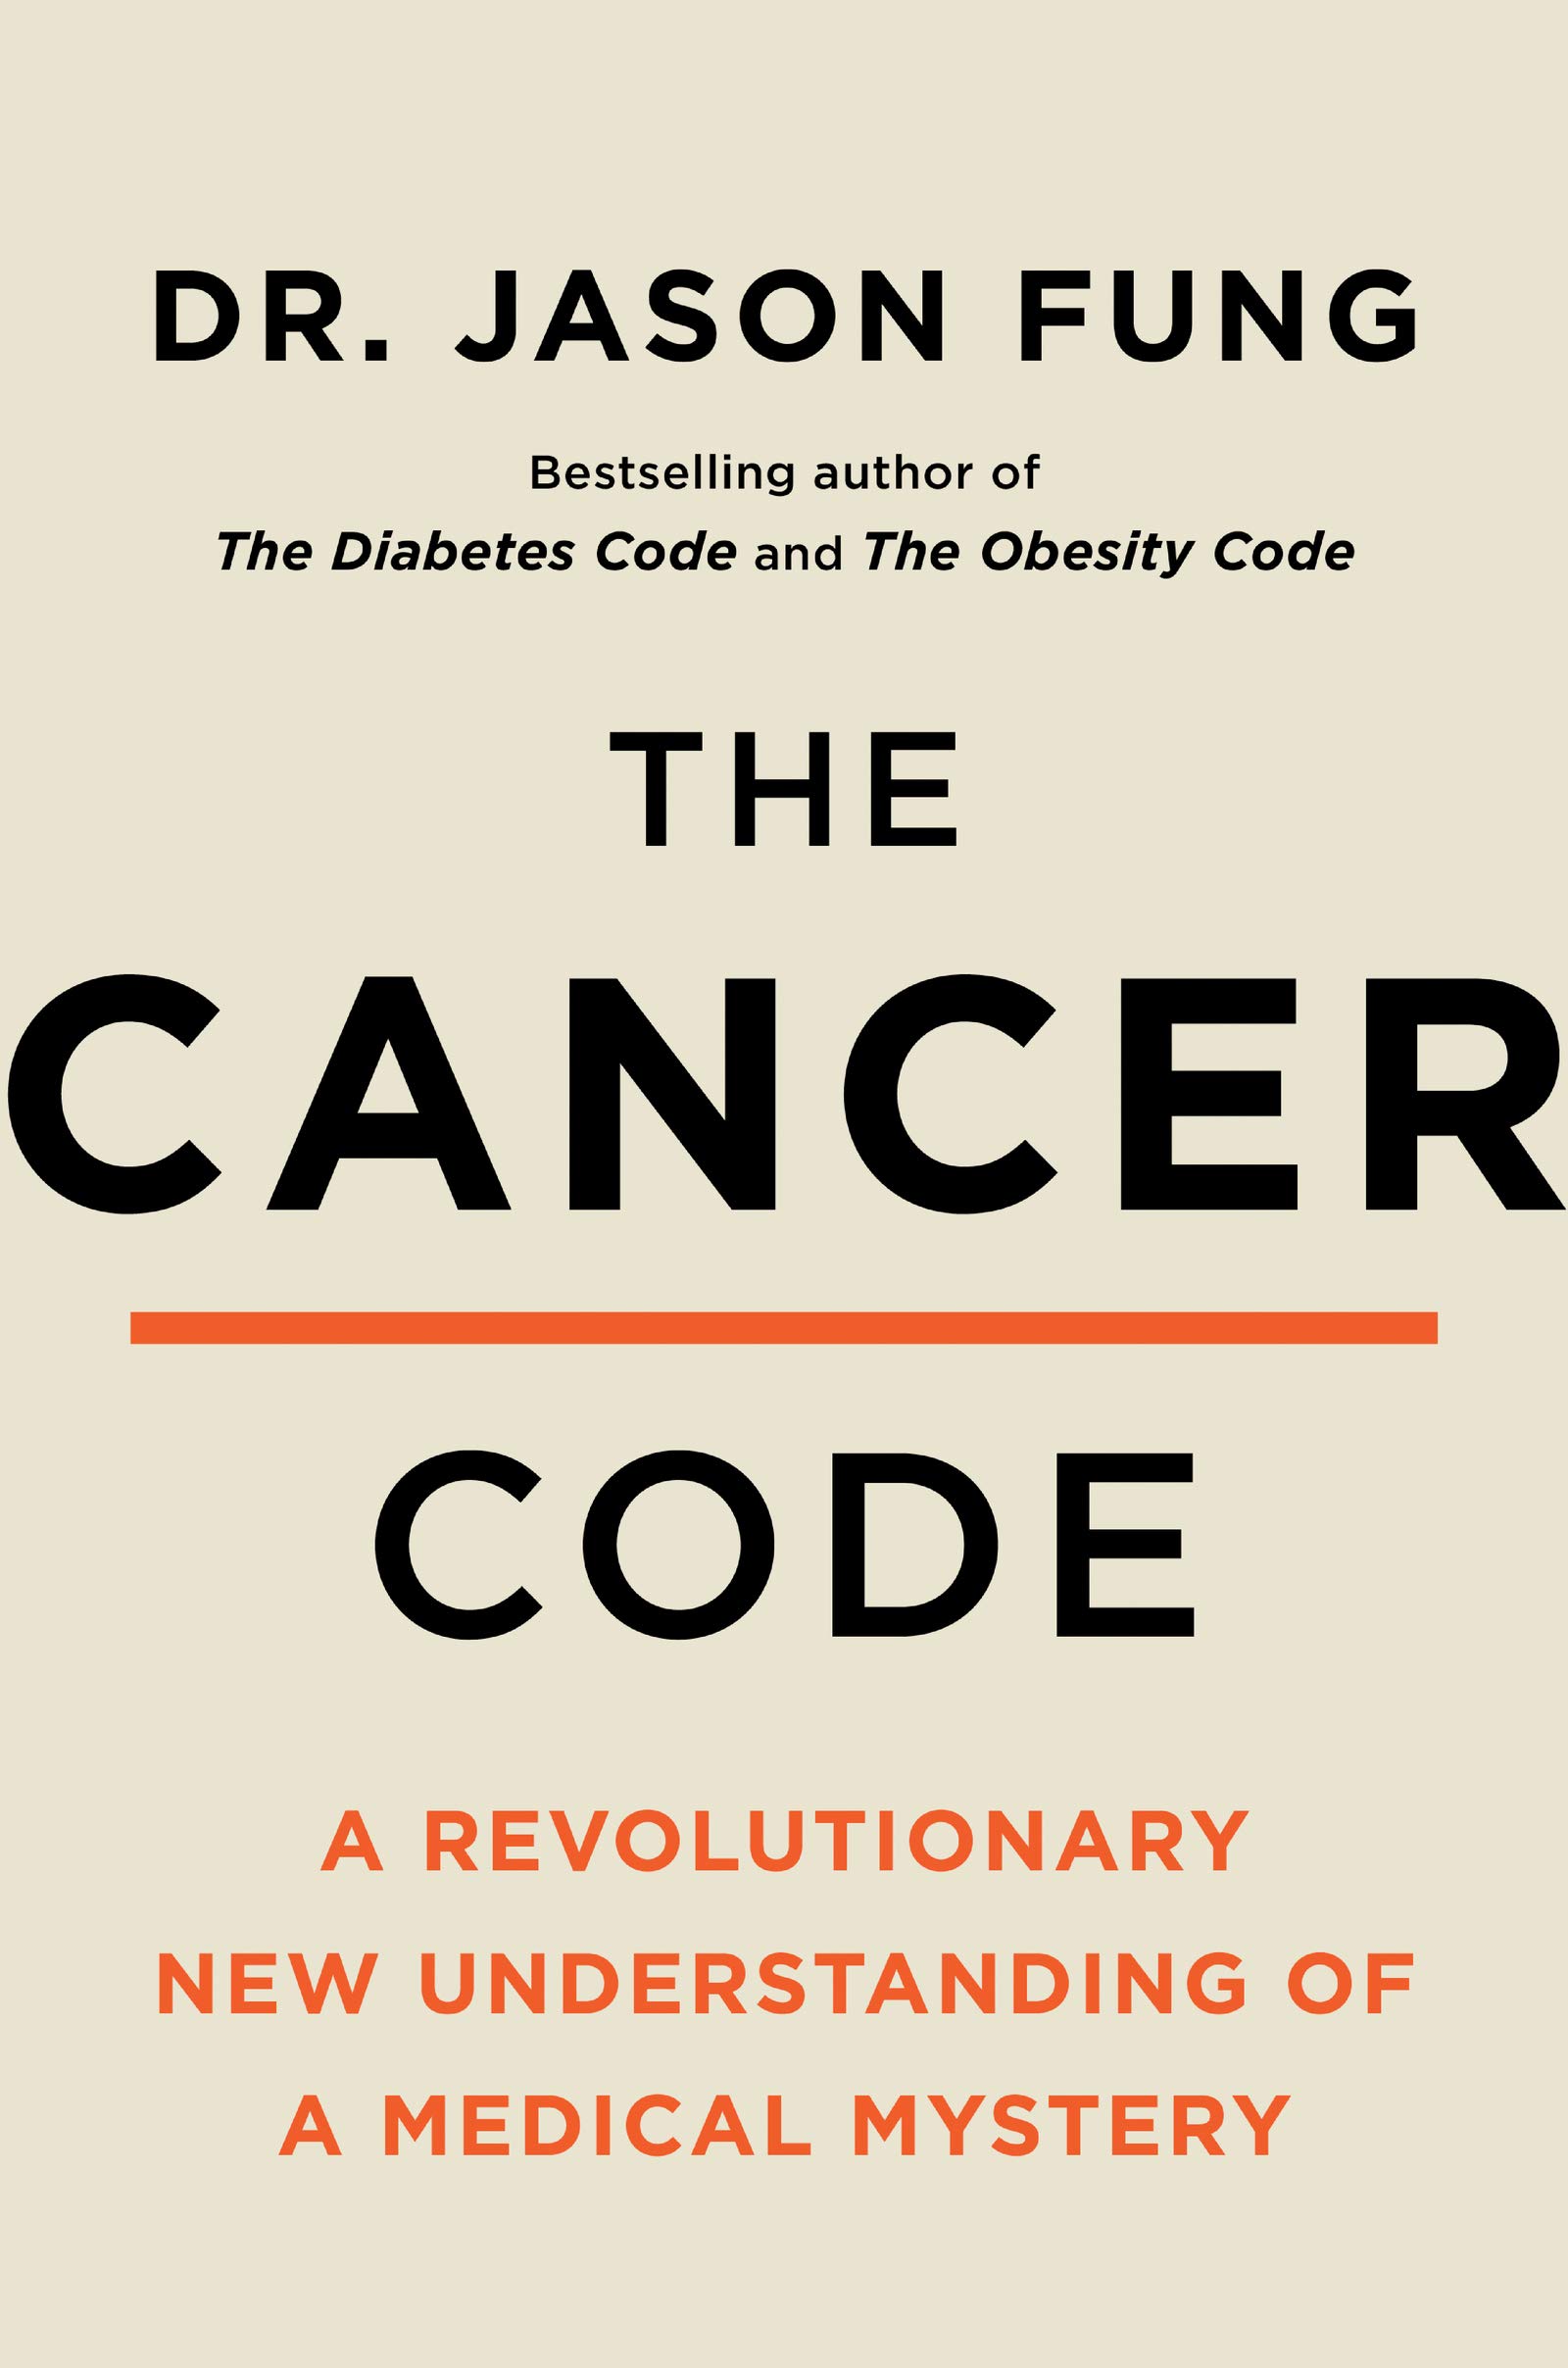 The Cancer Code: A Revolutionary New Understanding of a Medical Mystery (The Wellness Code Book 3) (eBook) by Dr. Jason Fung $1.99